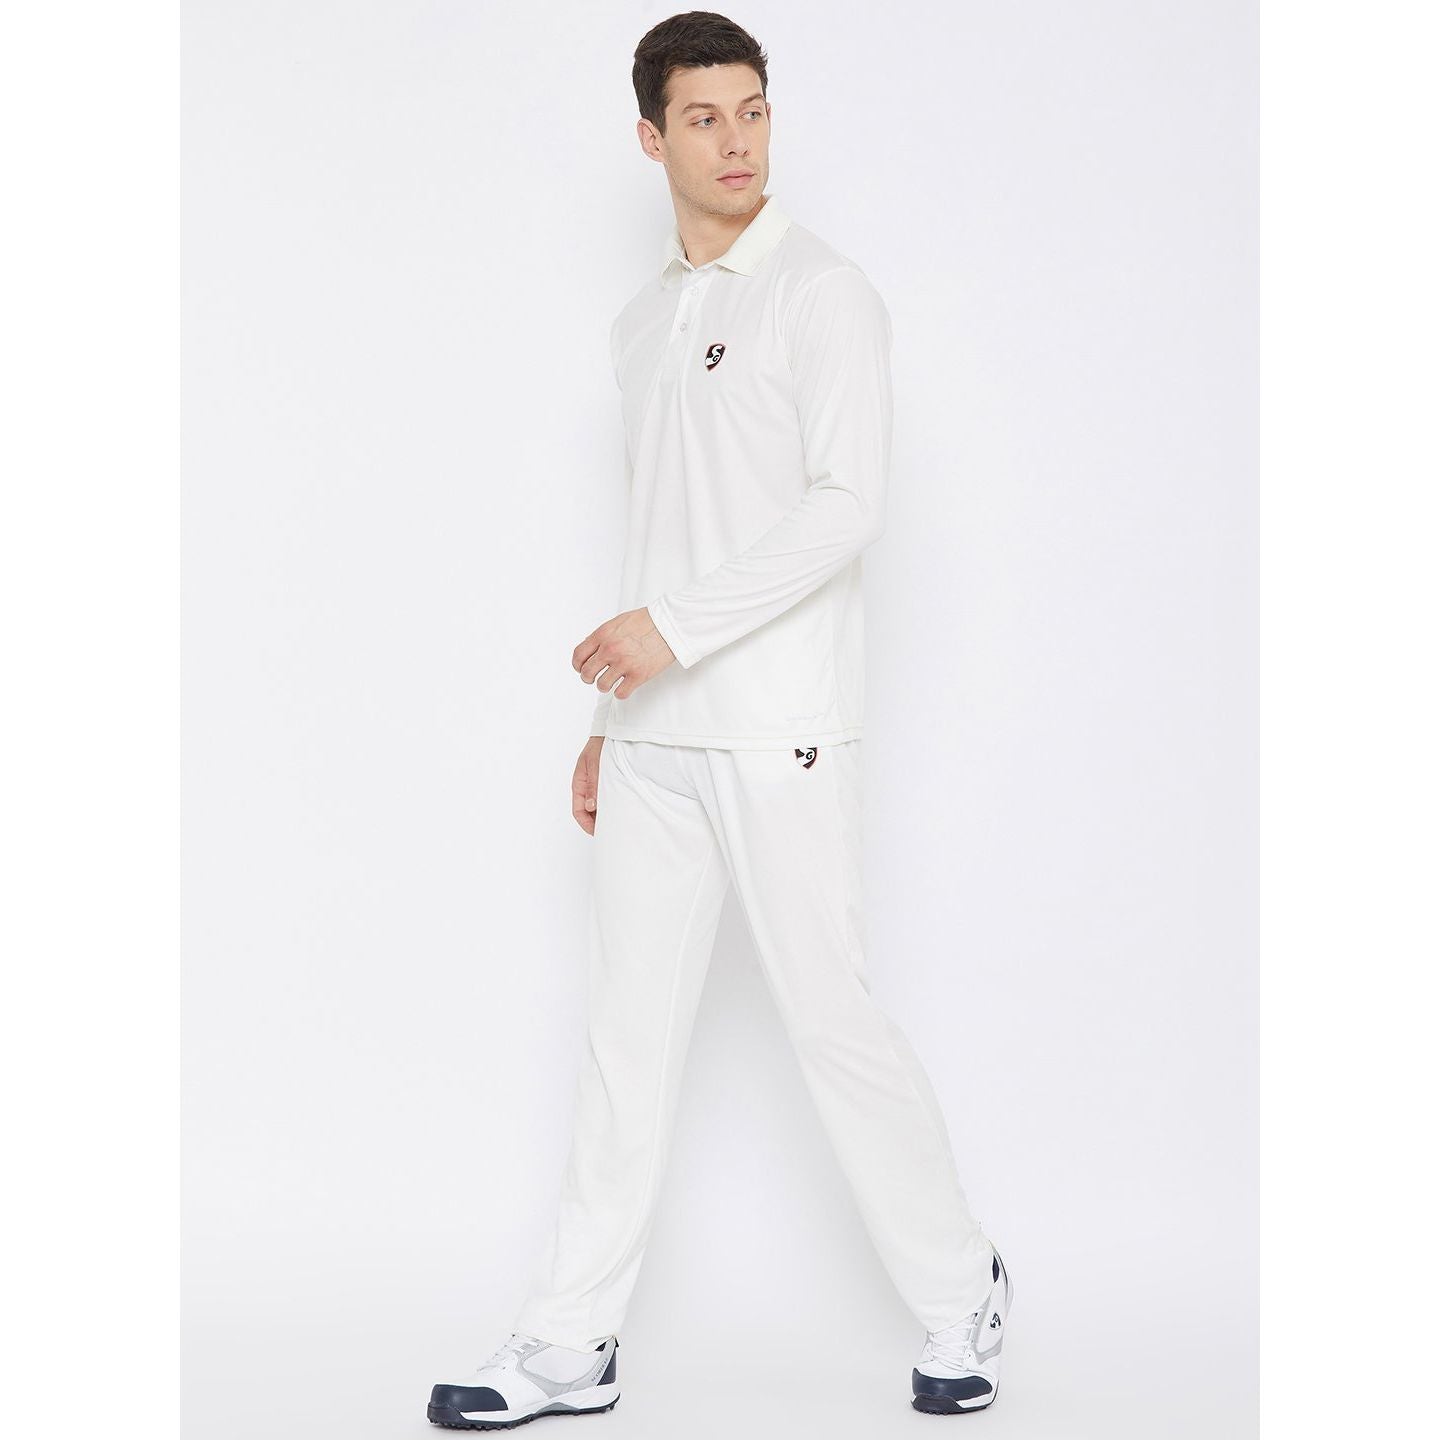 Pakistani Cricket Juicy Jersey Track Pants Trousers - Buy Pakistani Cricket  Juicy Jersey Track Pants Trousers online in India